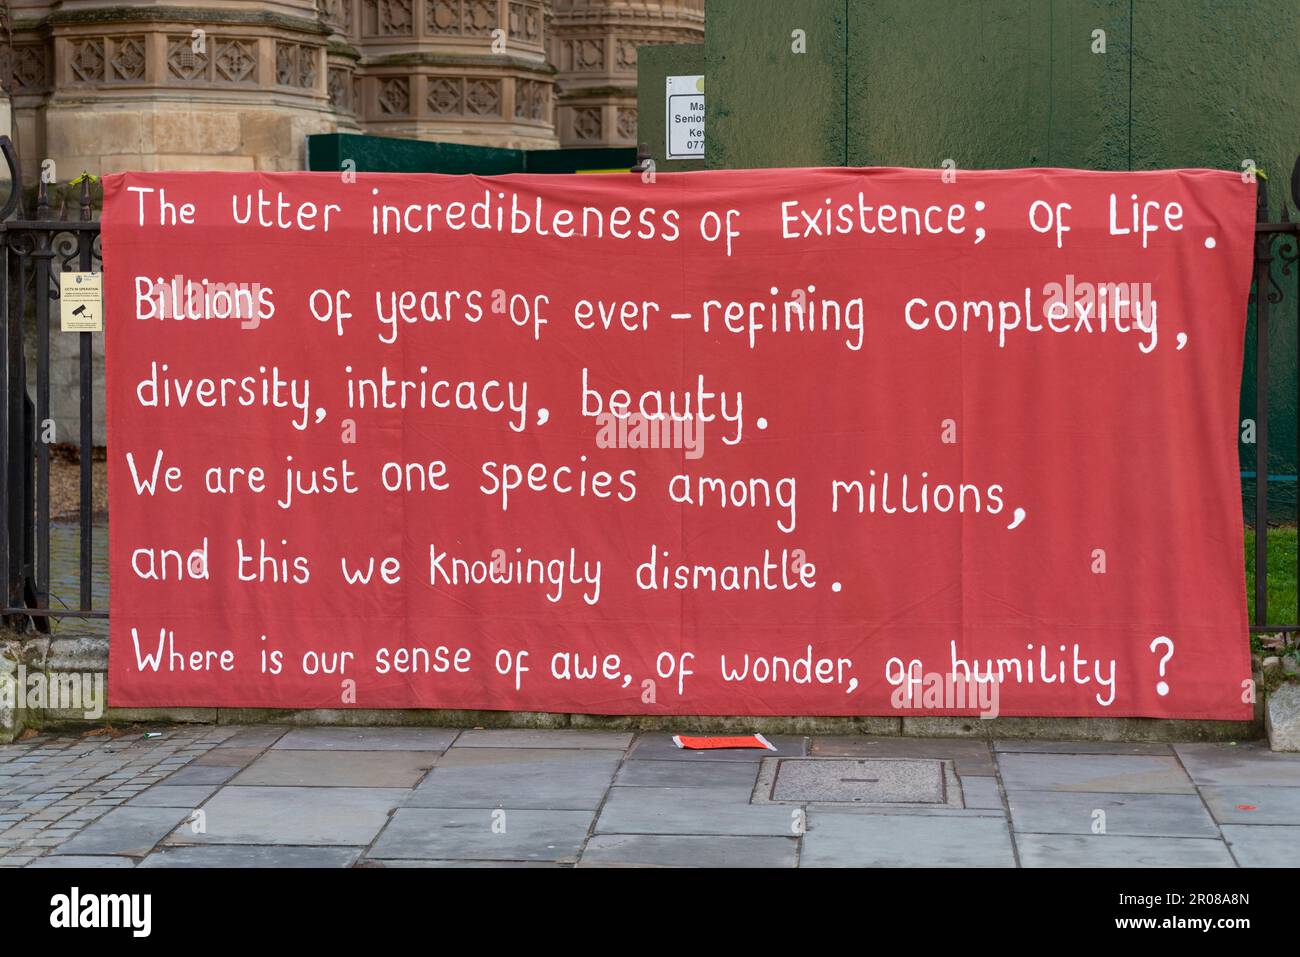 Quote at Extinction Rebellion encampment in Parliament Square, London, UK. The utter incredibleness of Existence; of Life...diversity...complexity Stock Photo